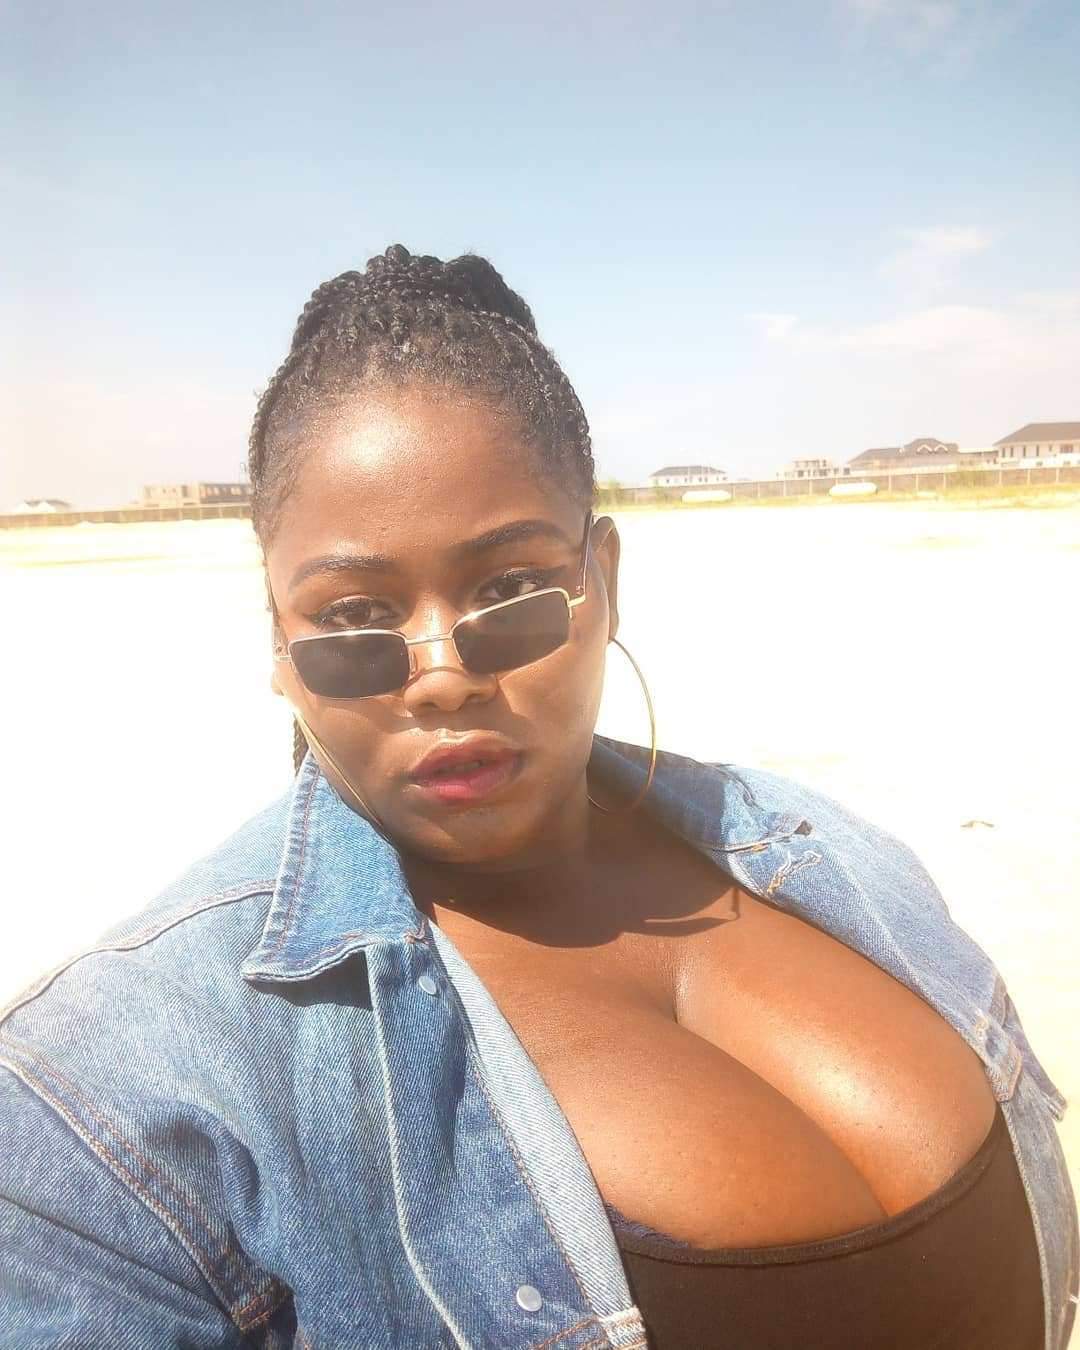 Nigerian Lady sets the internet on fire with her humongous bosoms (photos)